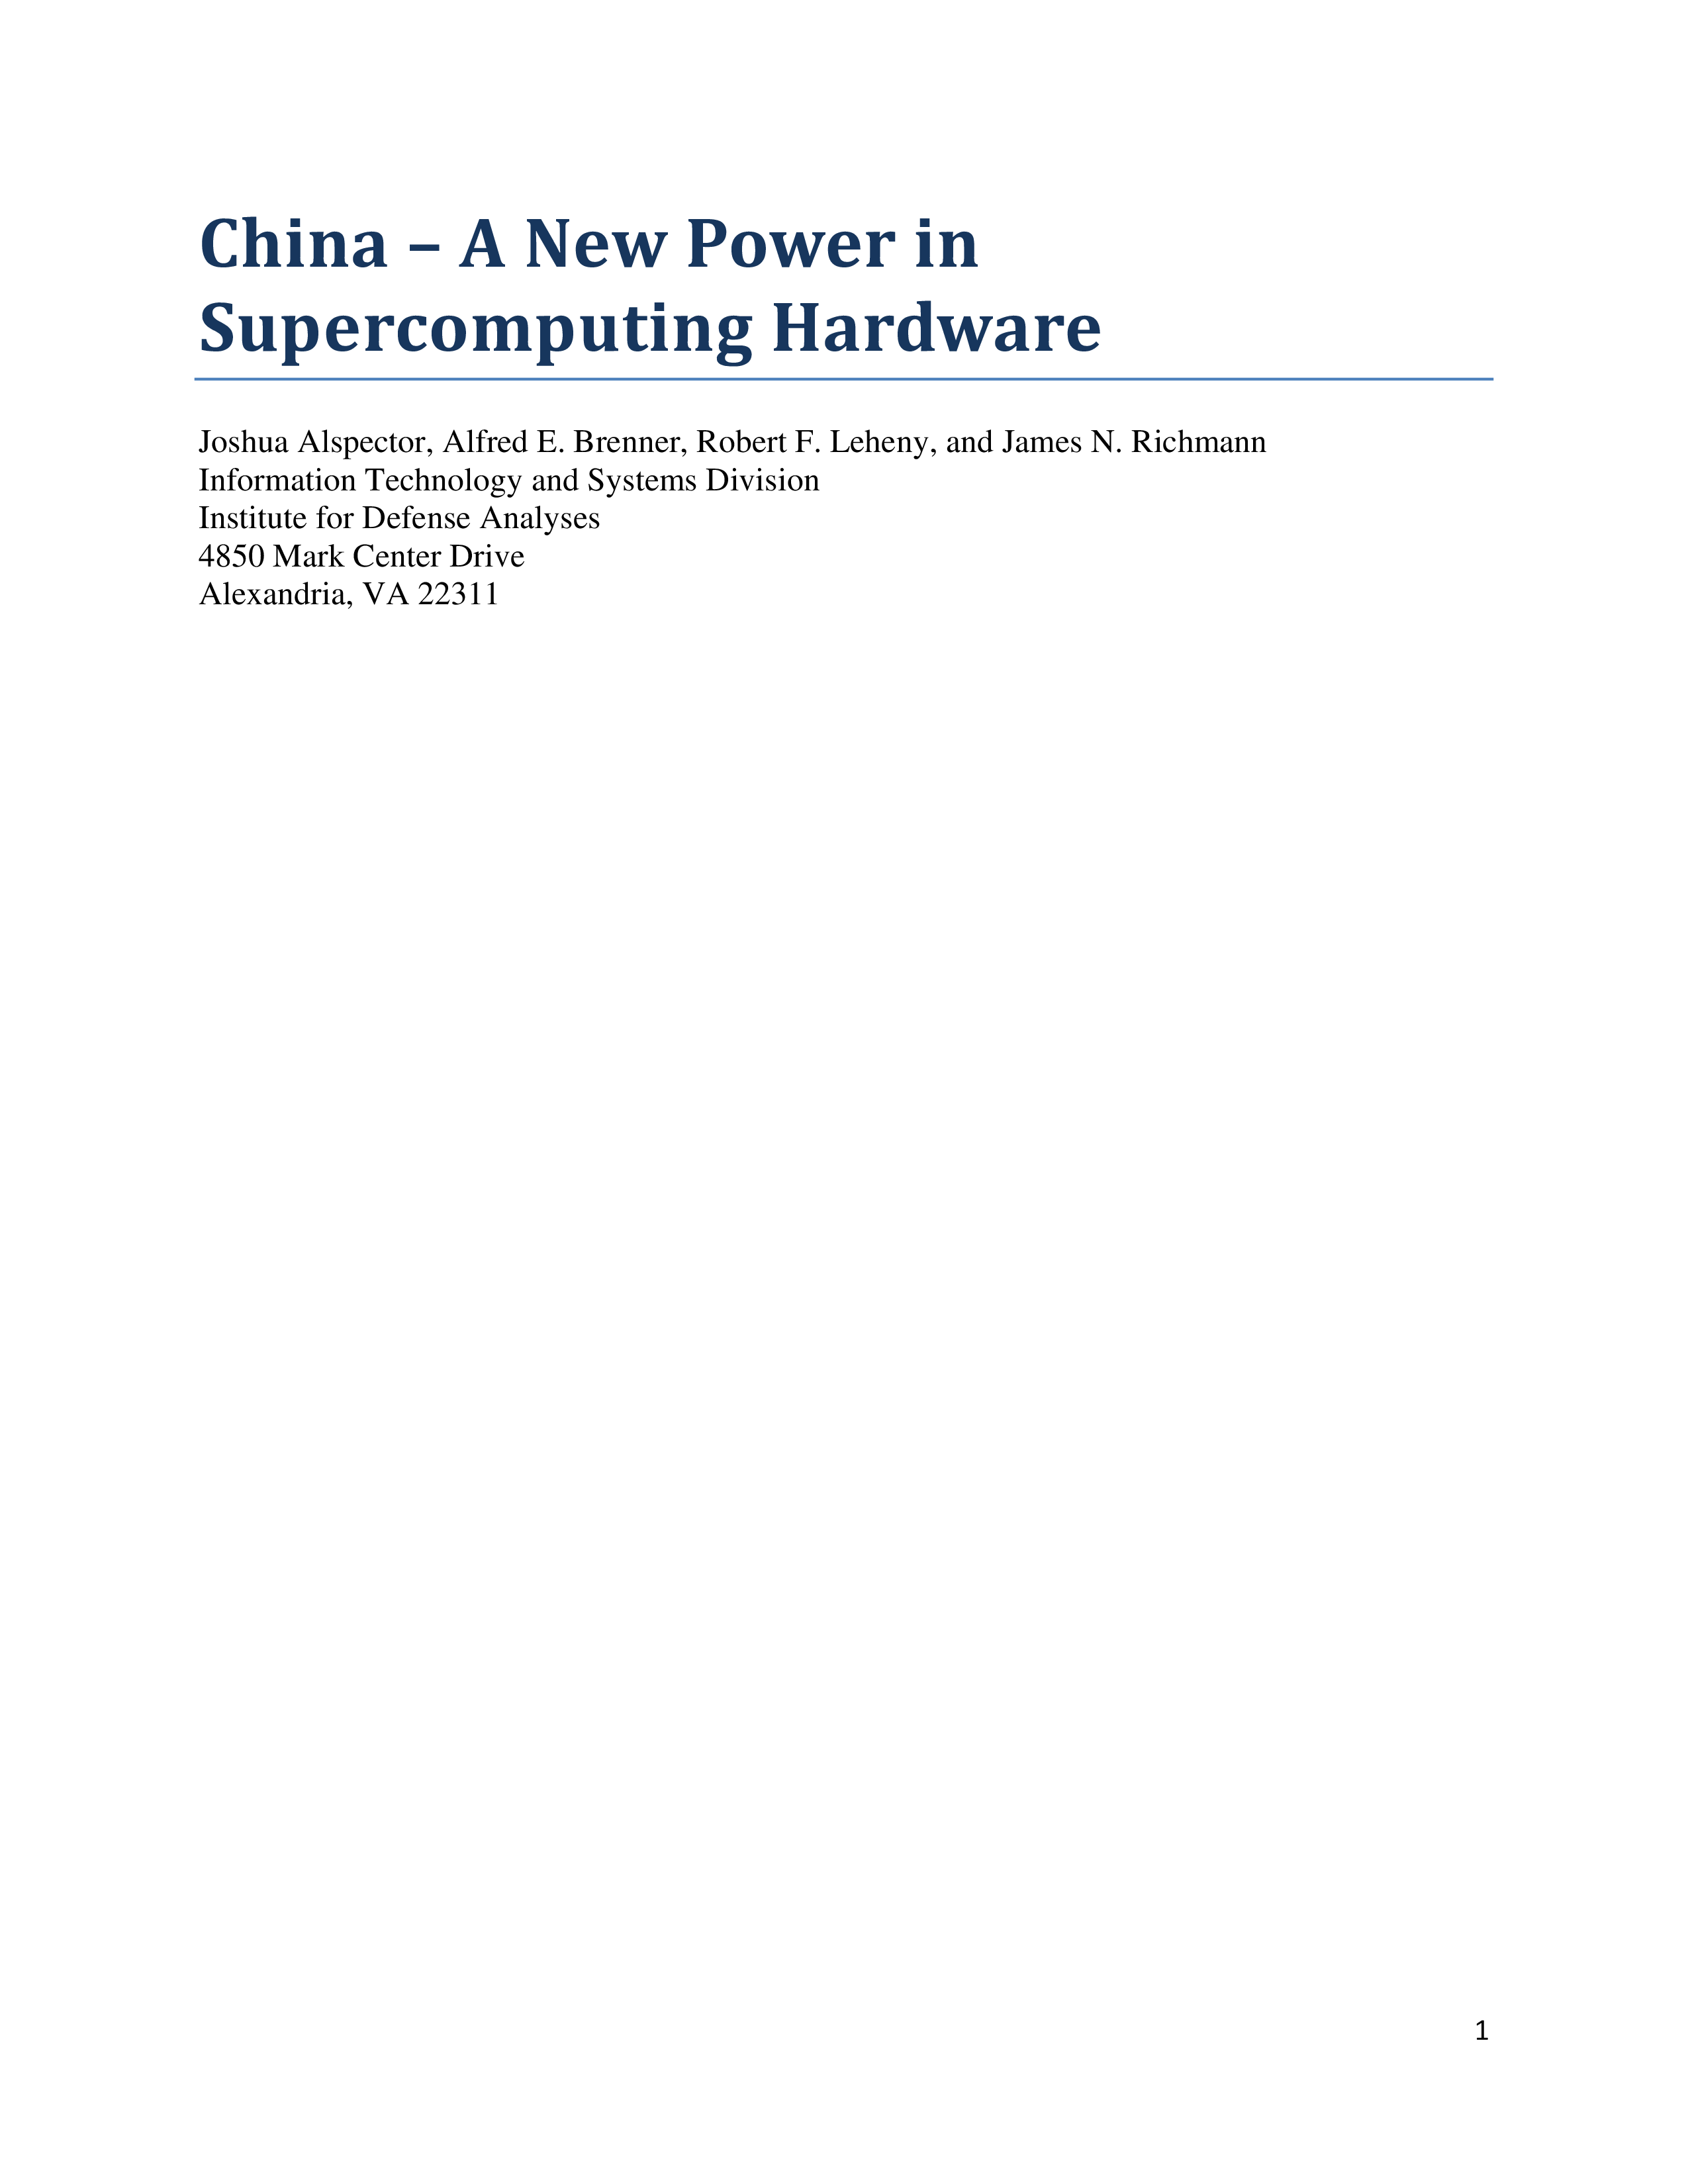 China - A New Power in Supercomputing Hardware